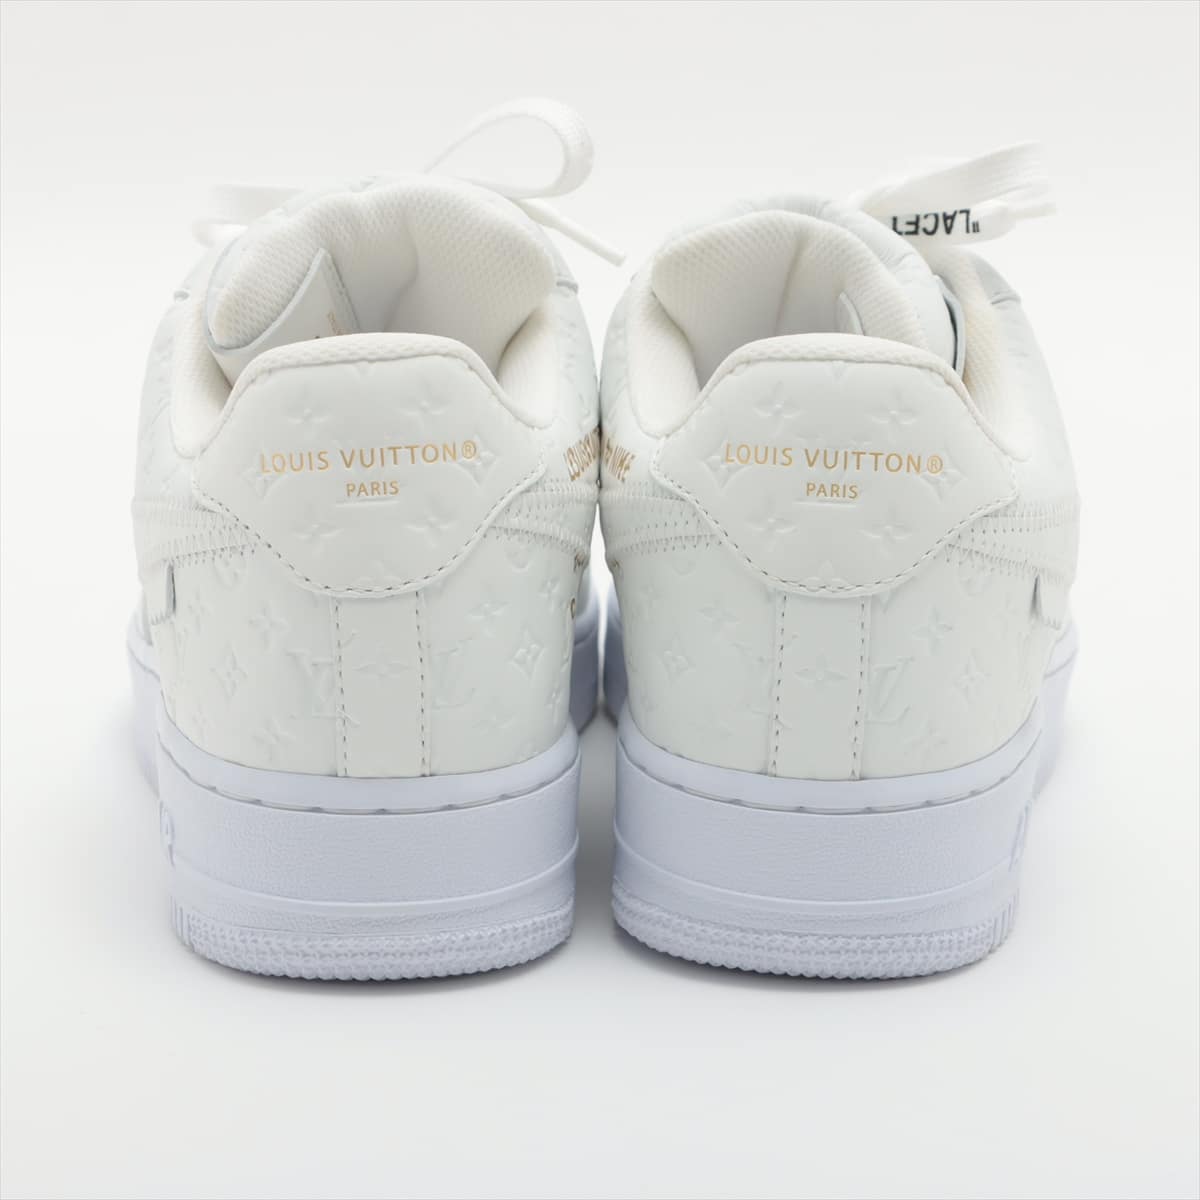 Louis Vuitton x Nike NIKE AIR FORCE 1 22 years Leather Sneakers 8 Men's White LD0292 Is there a replacement string